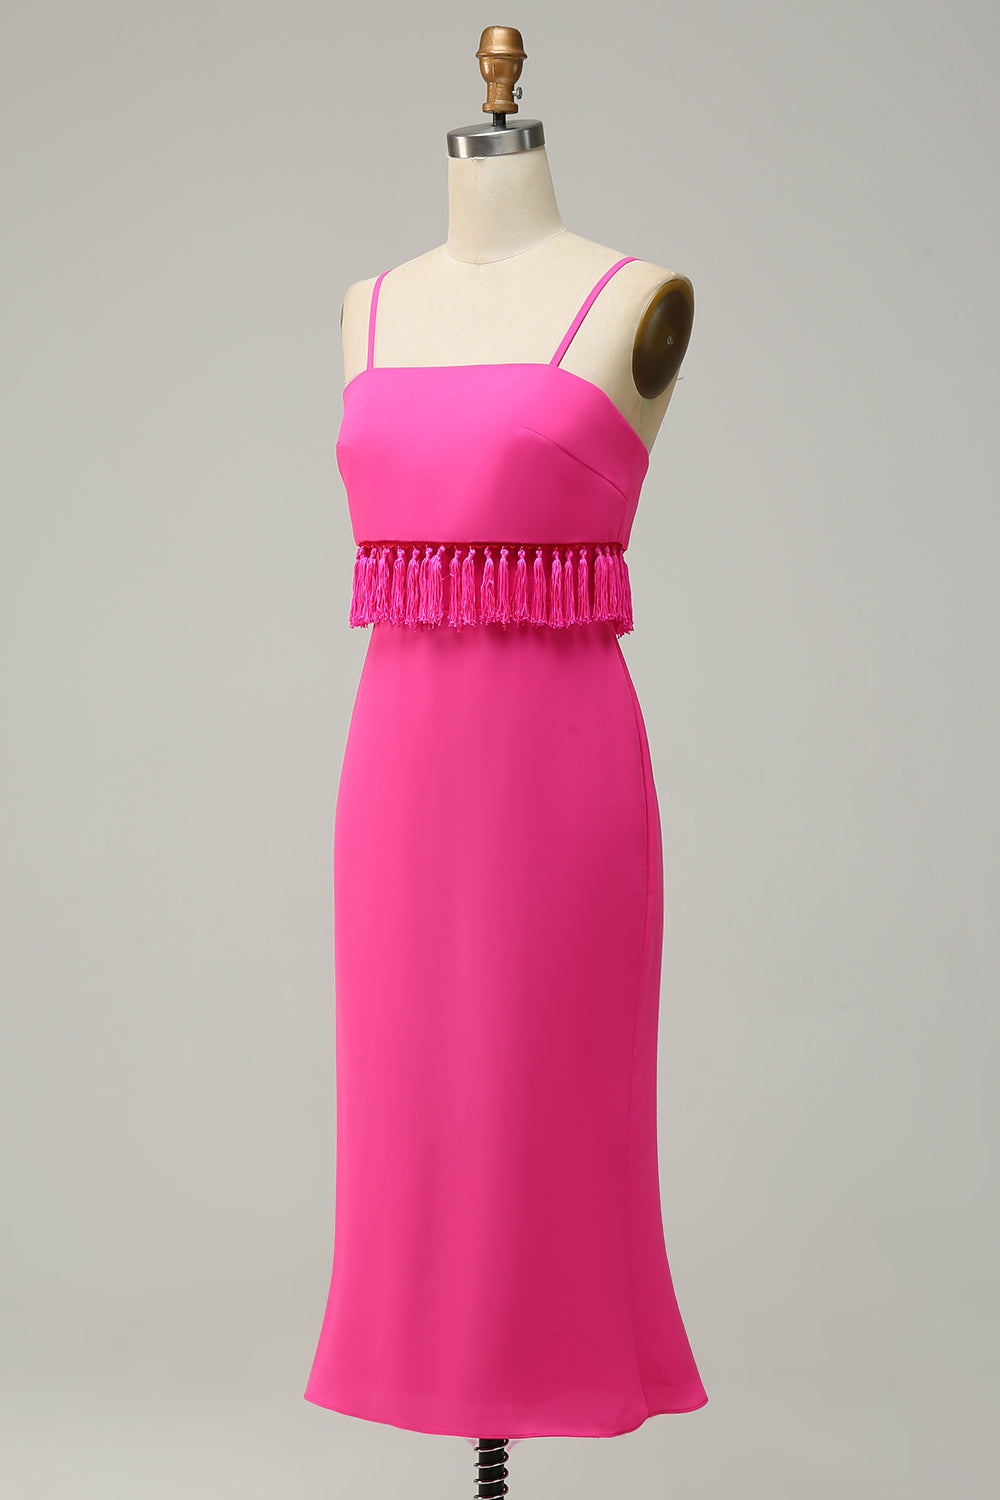 Spaghetti Straps Hot Pink Bridesmaid Dress with Fringes